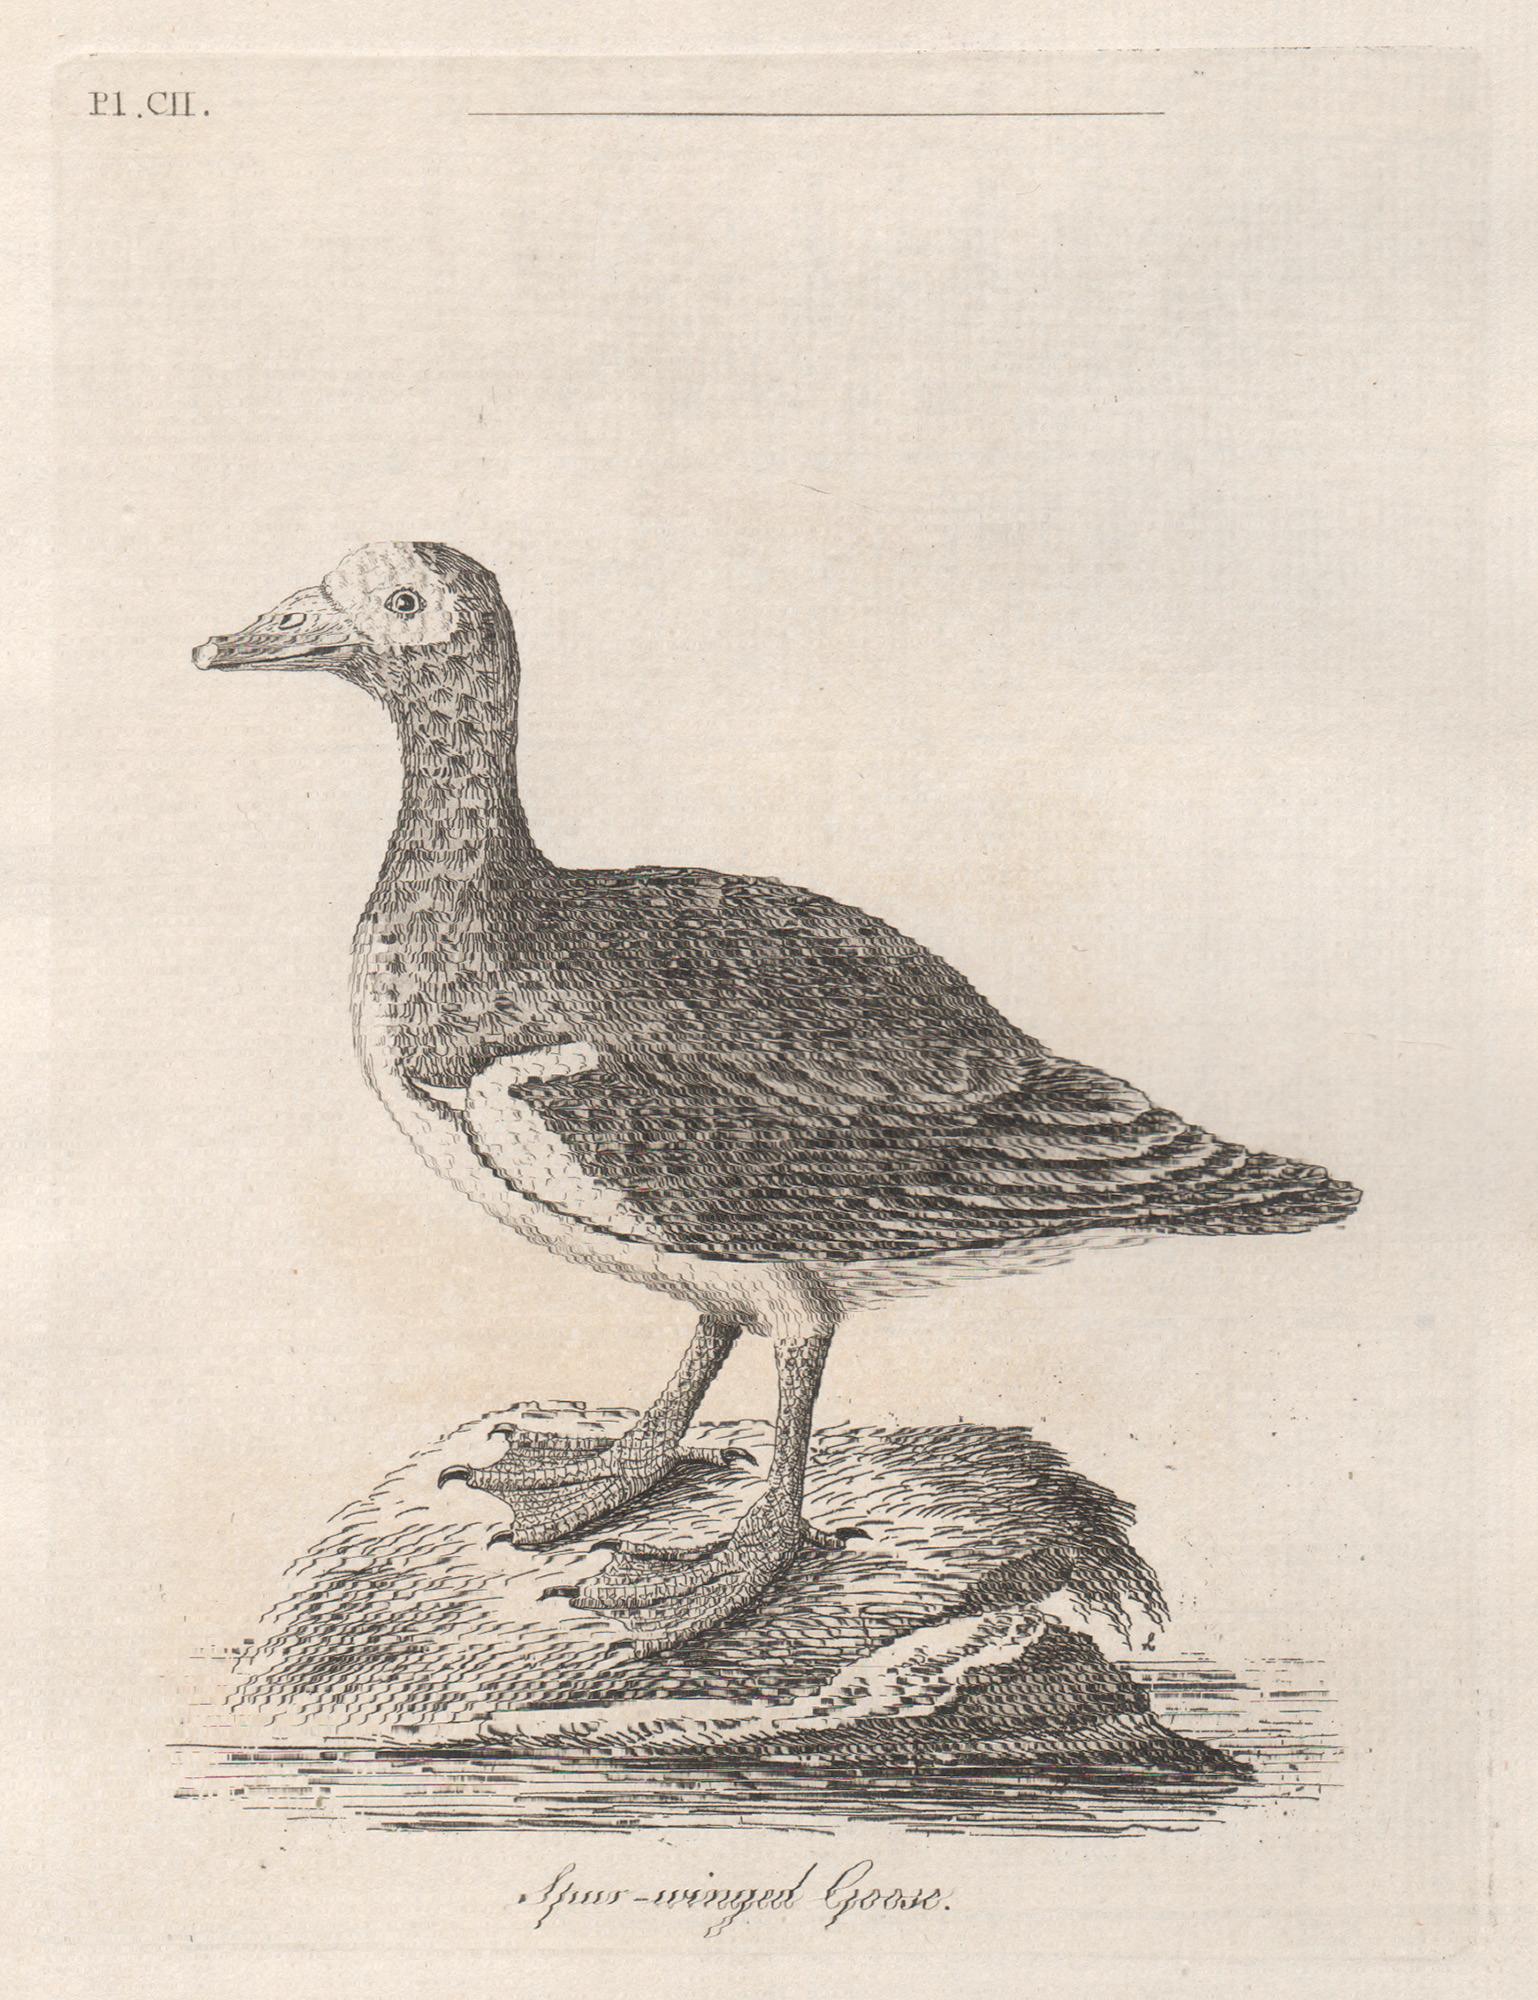 Copper-line engraving. 1781. From John Latham's 'General Synopsis of Birds' 1781-1785, and its Supplements. Plate number top left. Laid paper.

John Latham was the leading English ornithologist of his day.

175mm by 135mm (platemark) 
240mm by 180mm